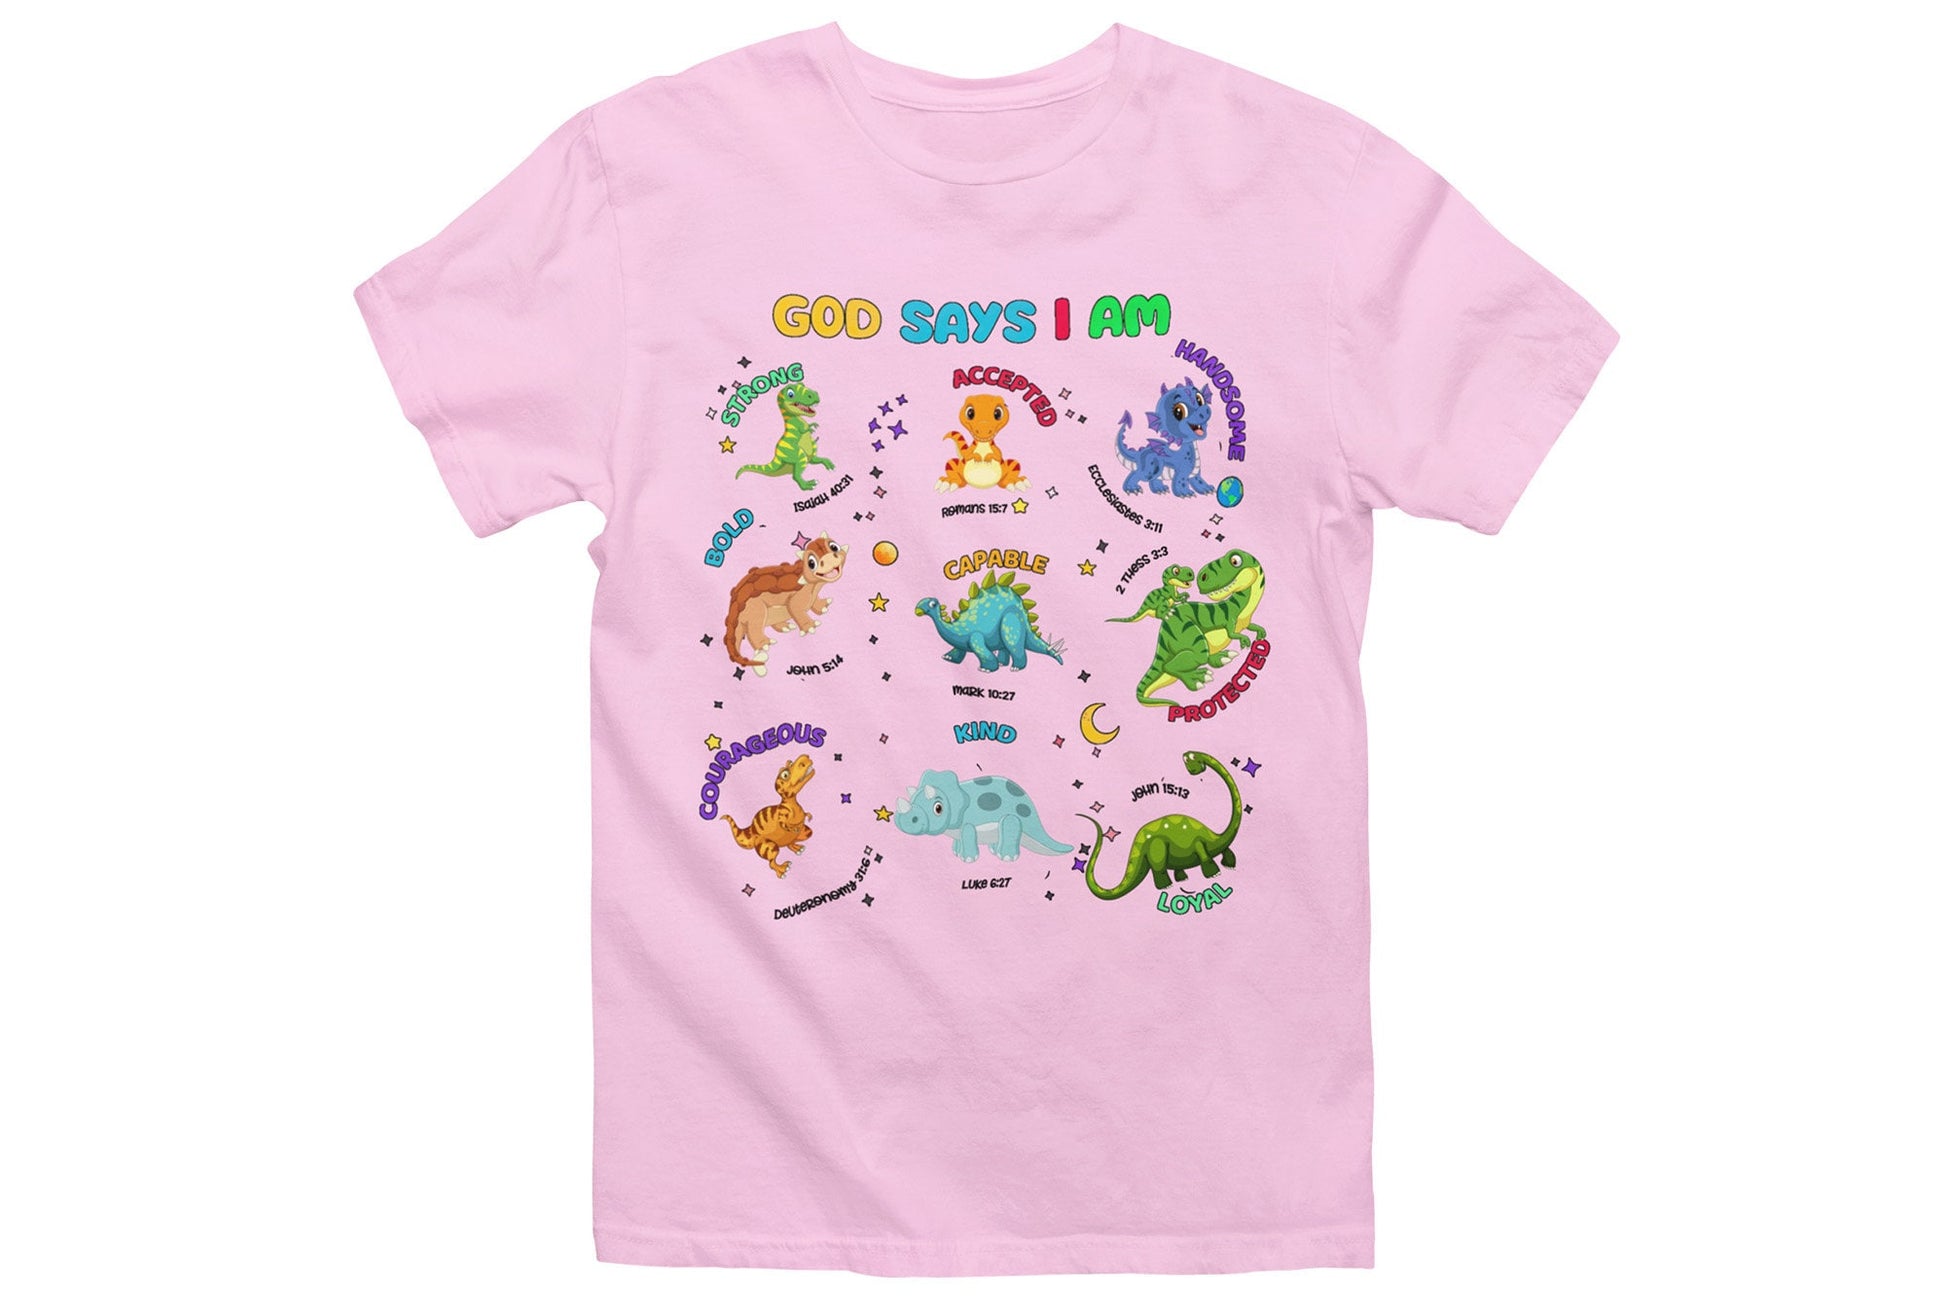 God Says I Am Bible Verse Shirt in pink